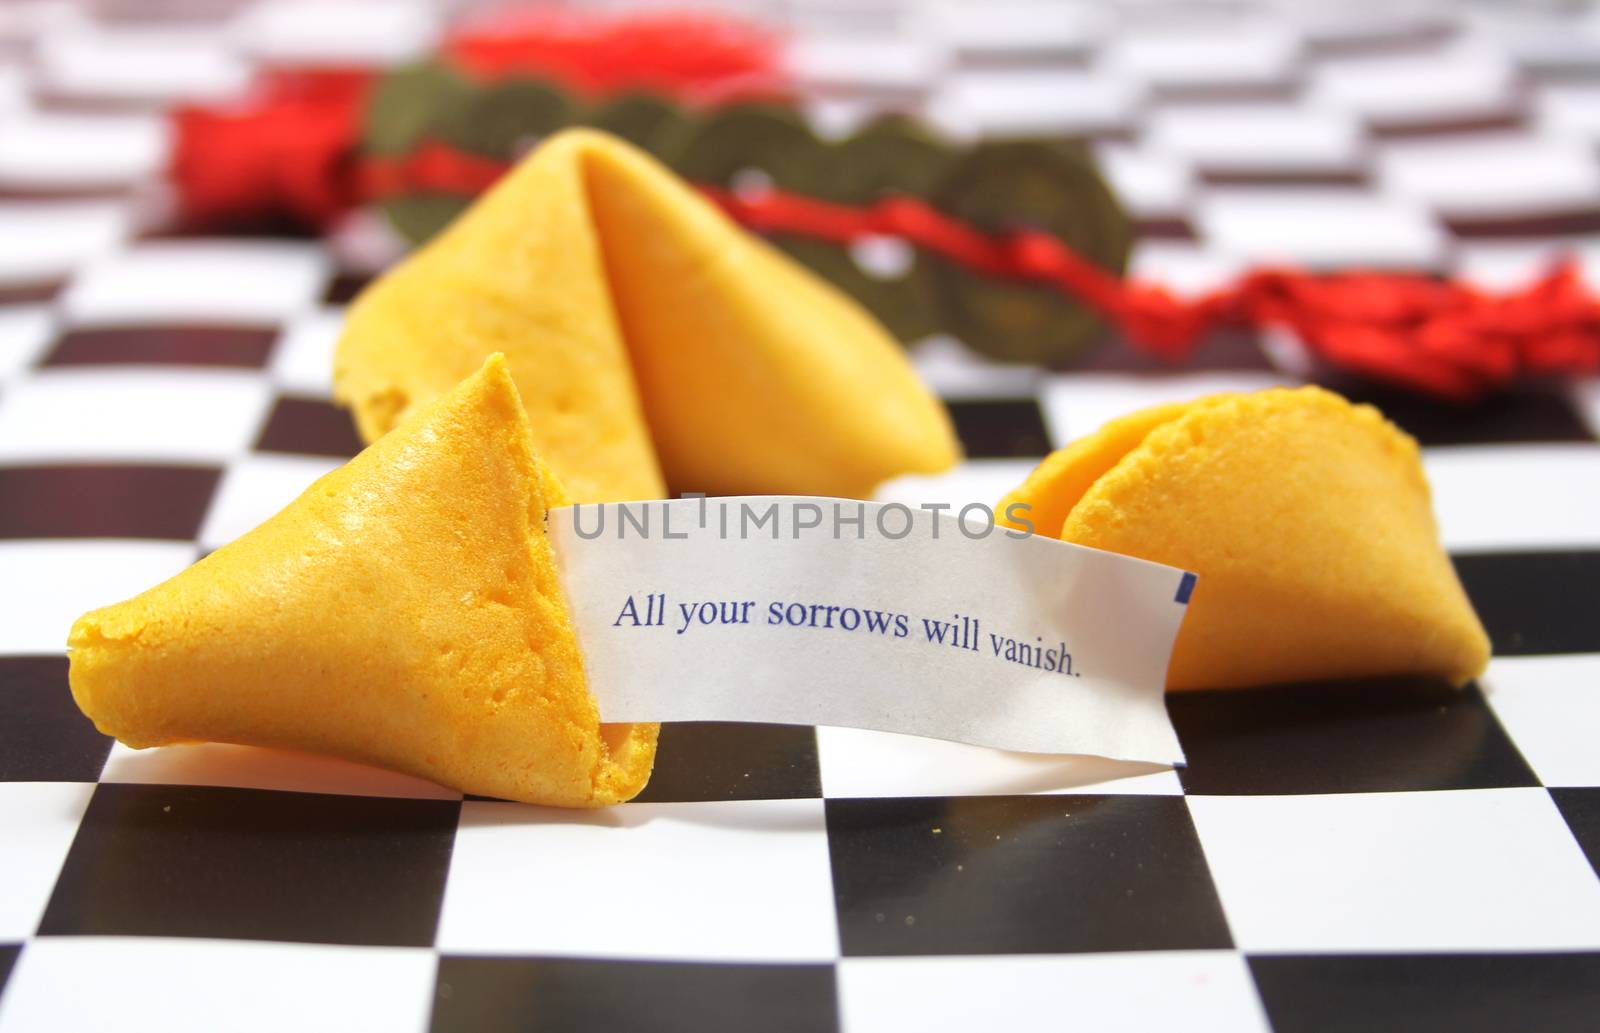 Fortune Cookie by Marti157900